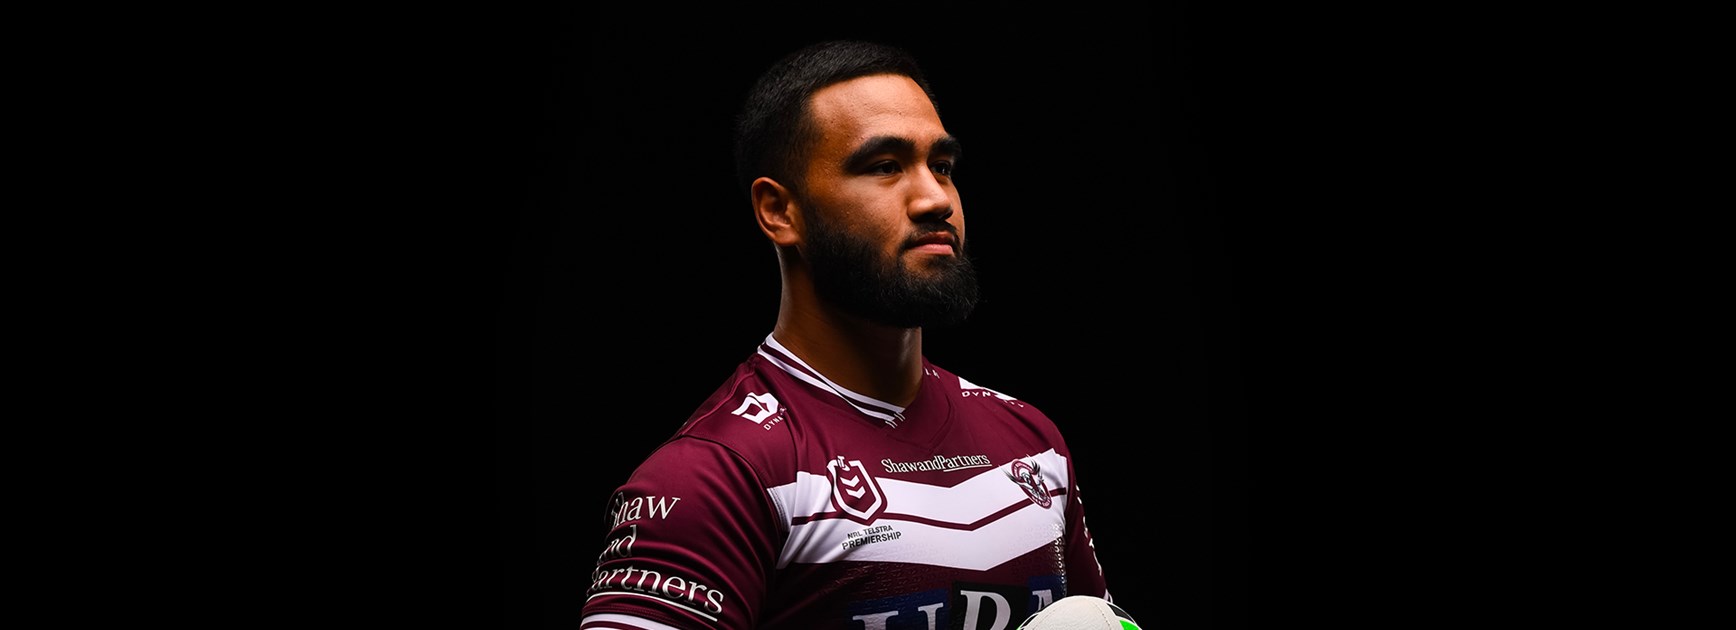 Statement from Manly Warringah Sea Eagles